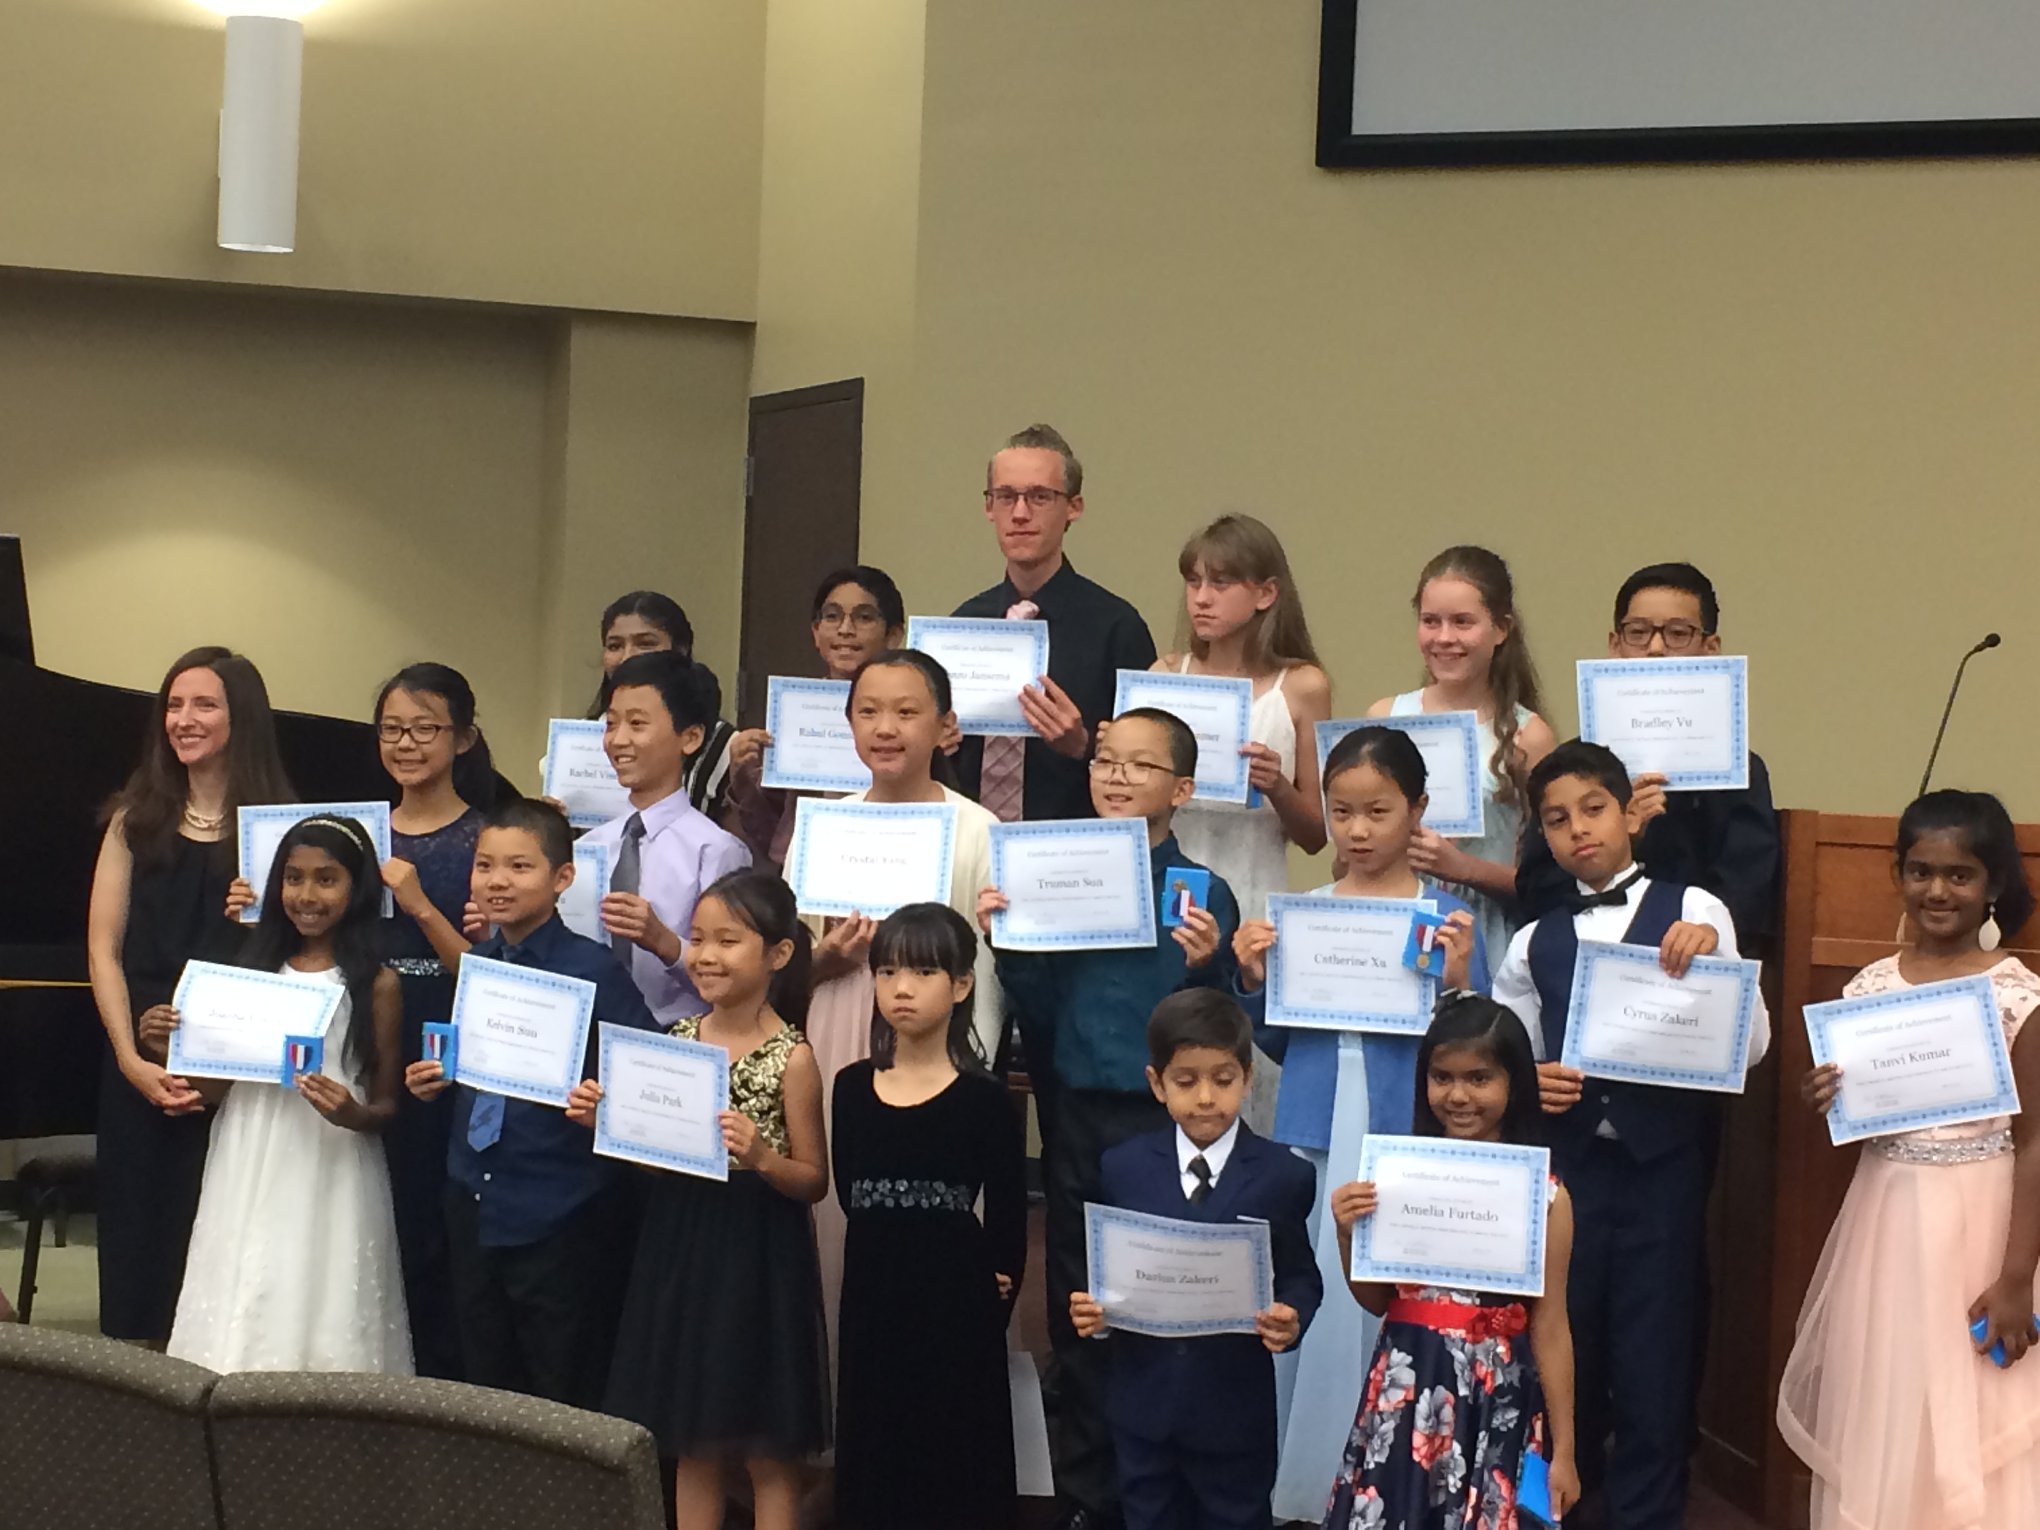 Students pose for a group photo holding certificates after a recital.